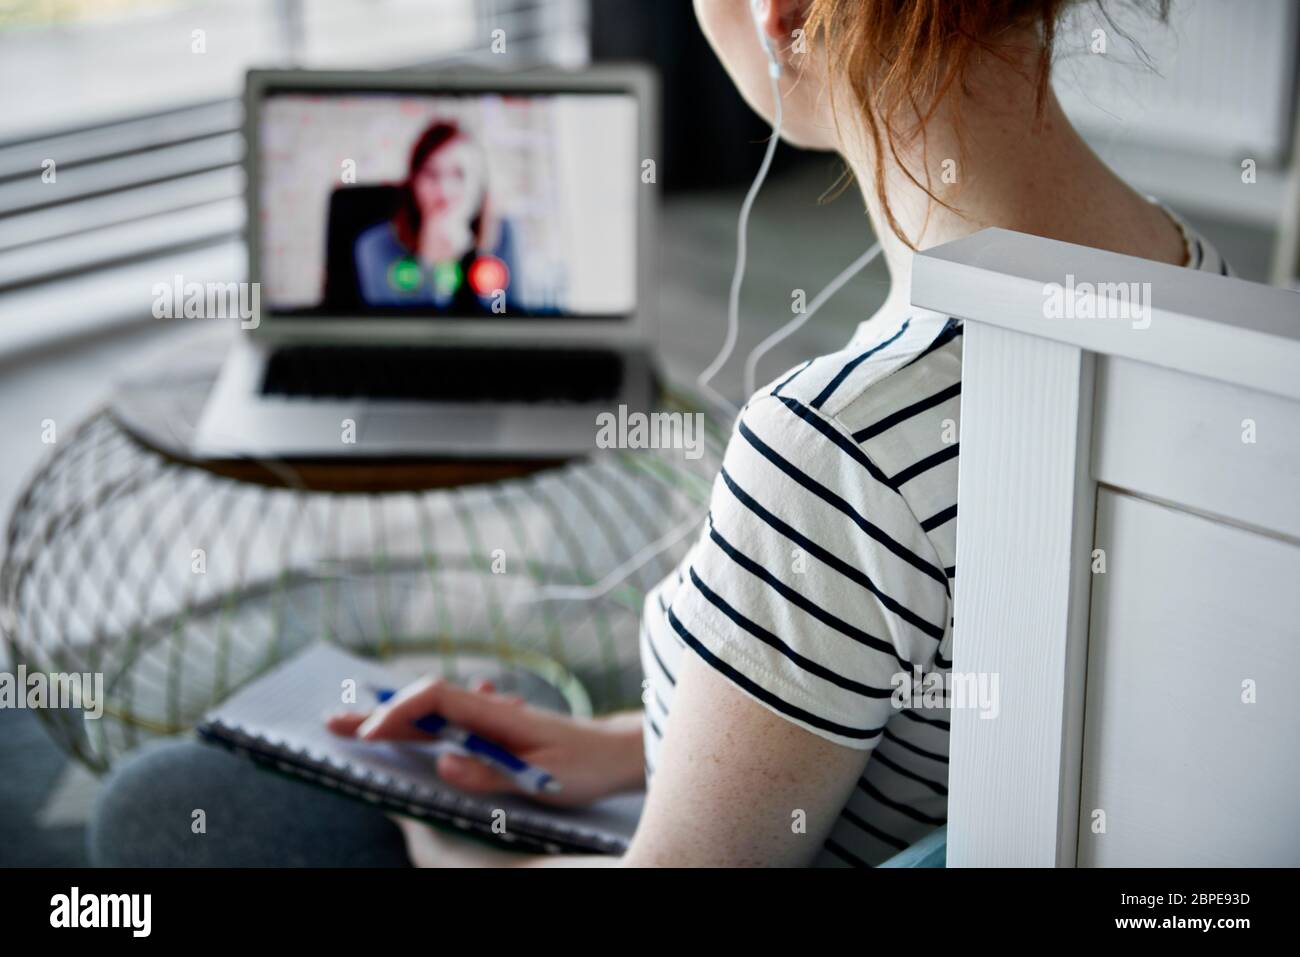 Rear view of woman having a video conference Stock Photo